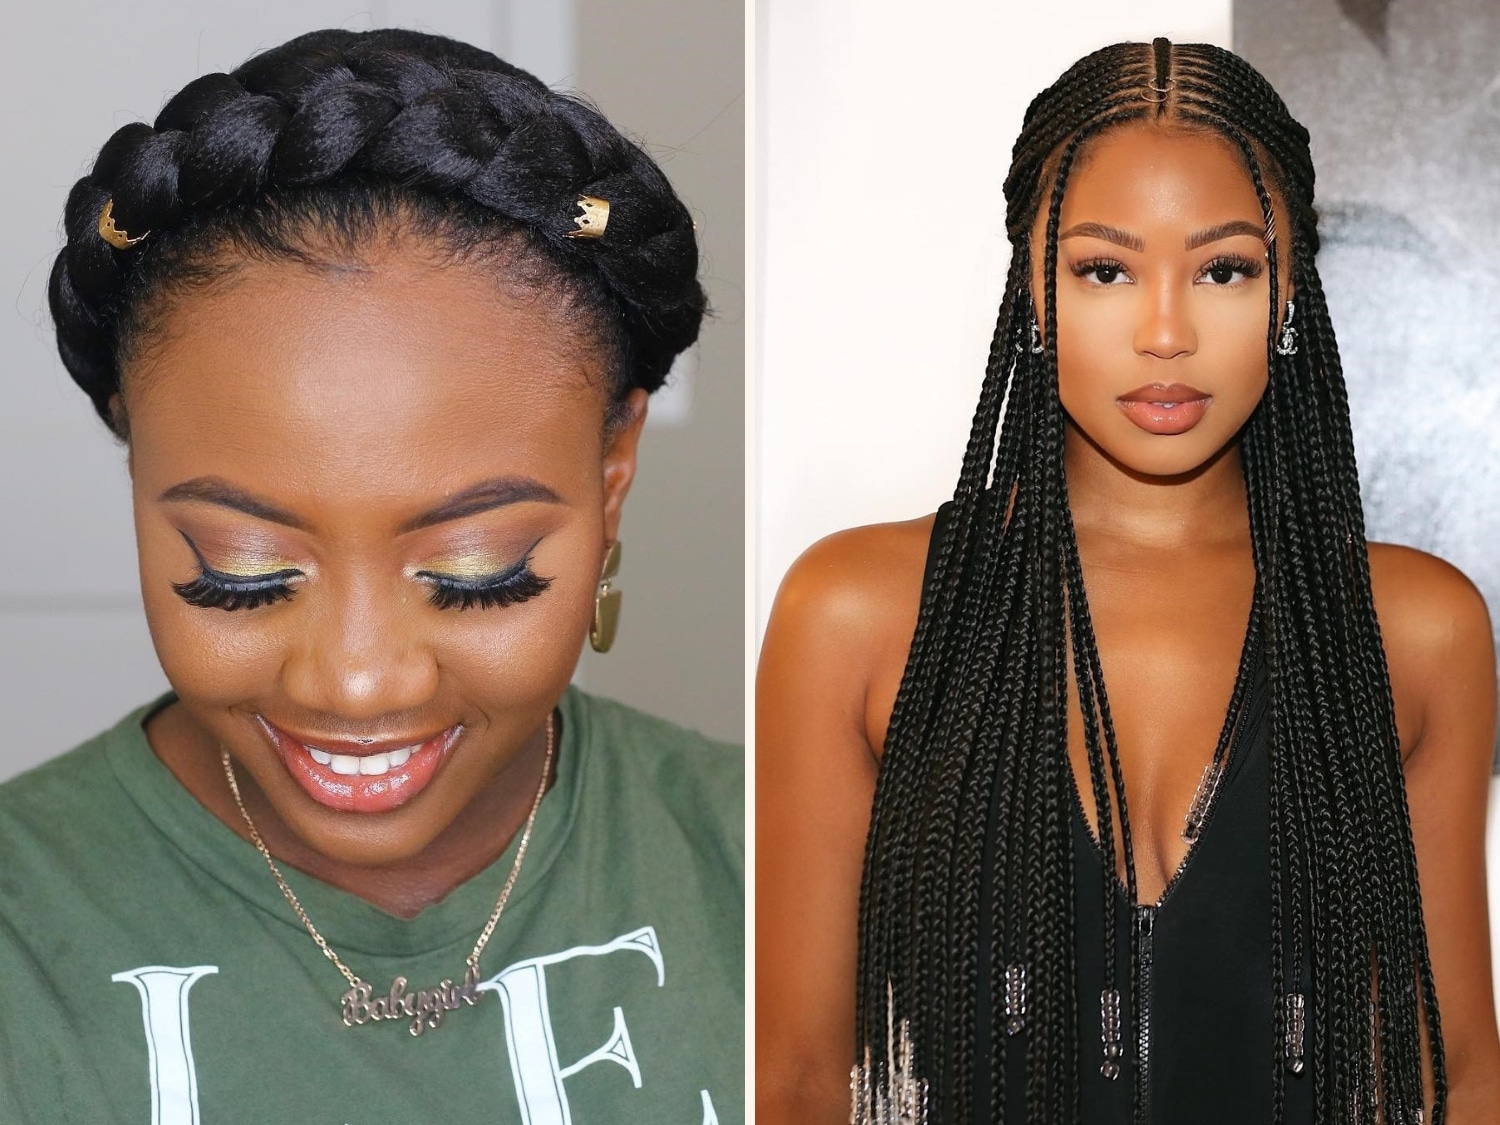 Hairstyle How To: Looped Side Braids  Hairstyle, Braided hairstyles,  Braided hairdo